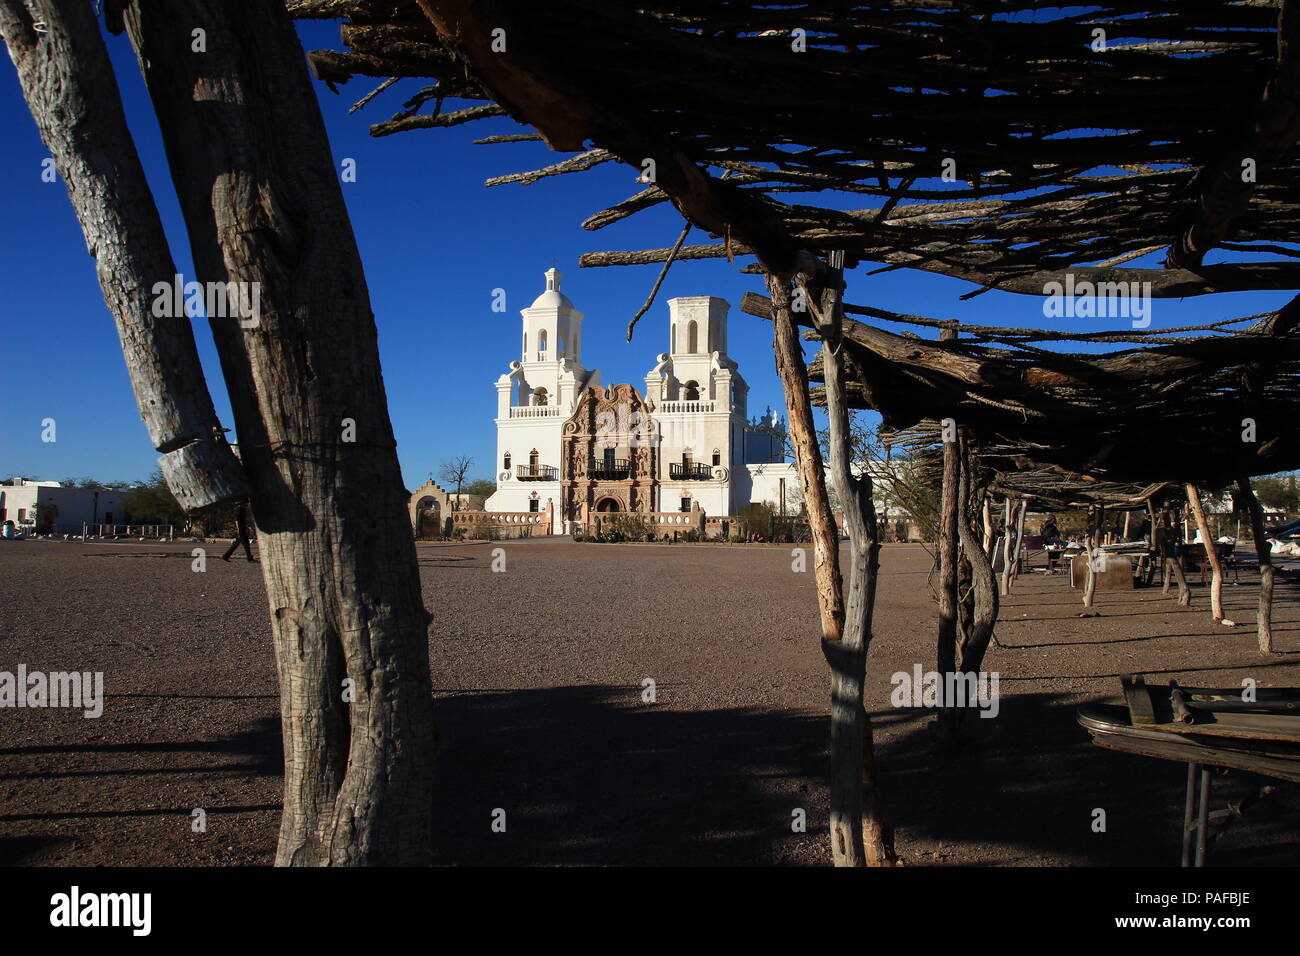 A Simpler Time: Beautifully renovated San Xavier Mission, Tucson, Arizona. Suitable for framing and display in hotel/motel rooms and travel agencies. Stock Photo